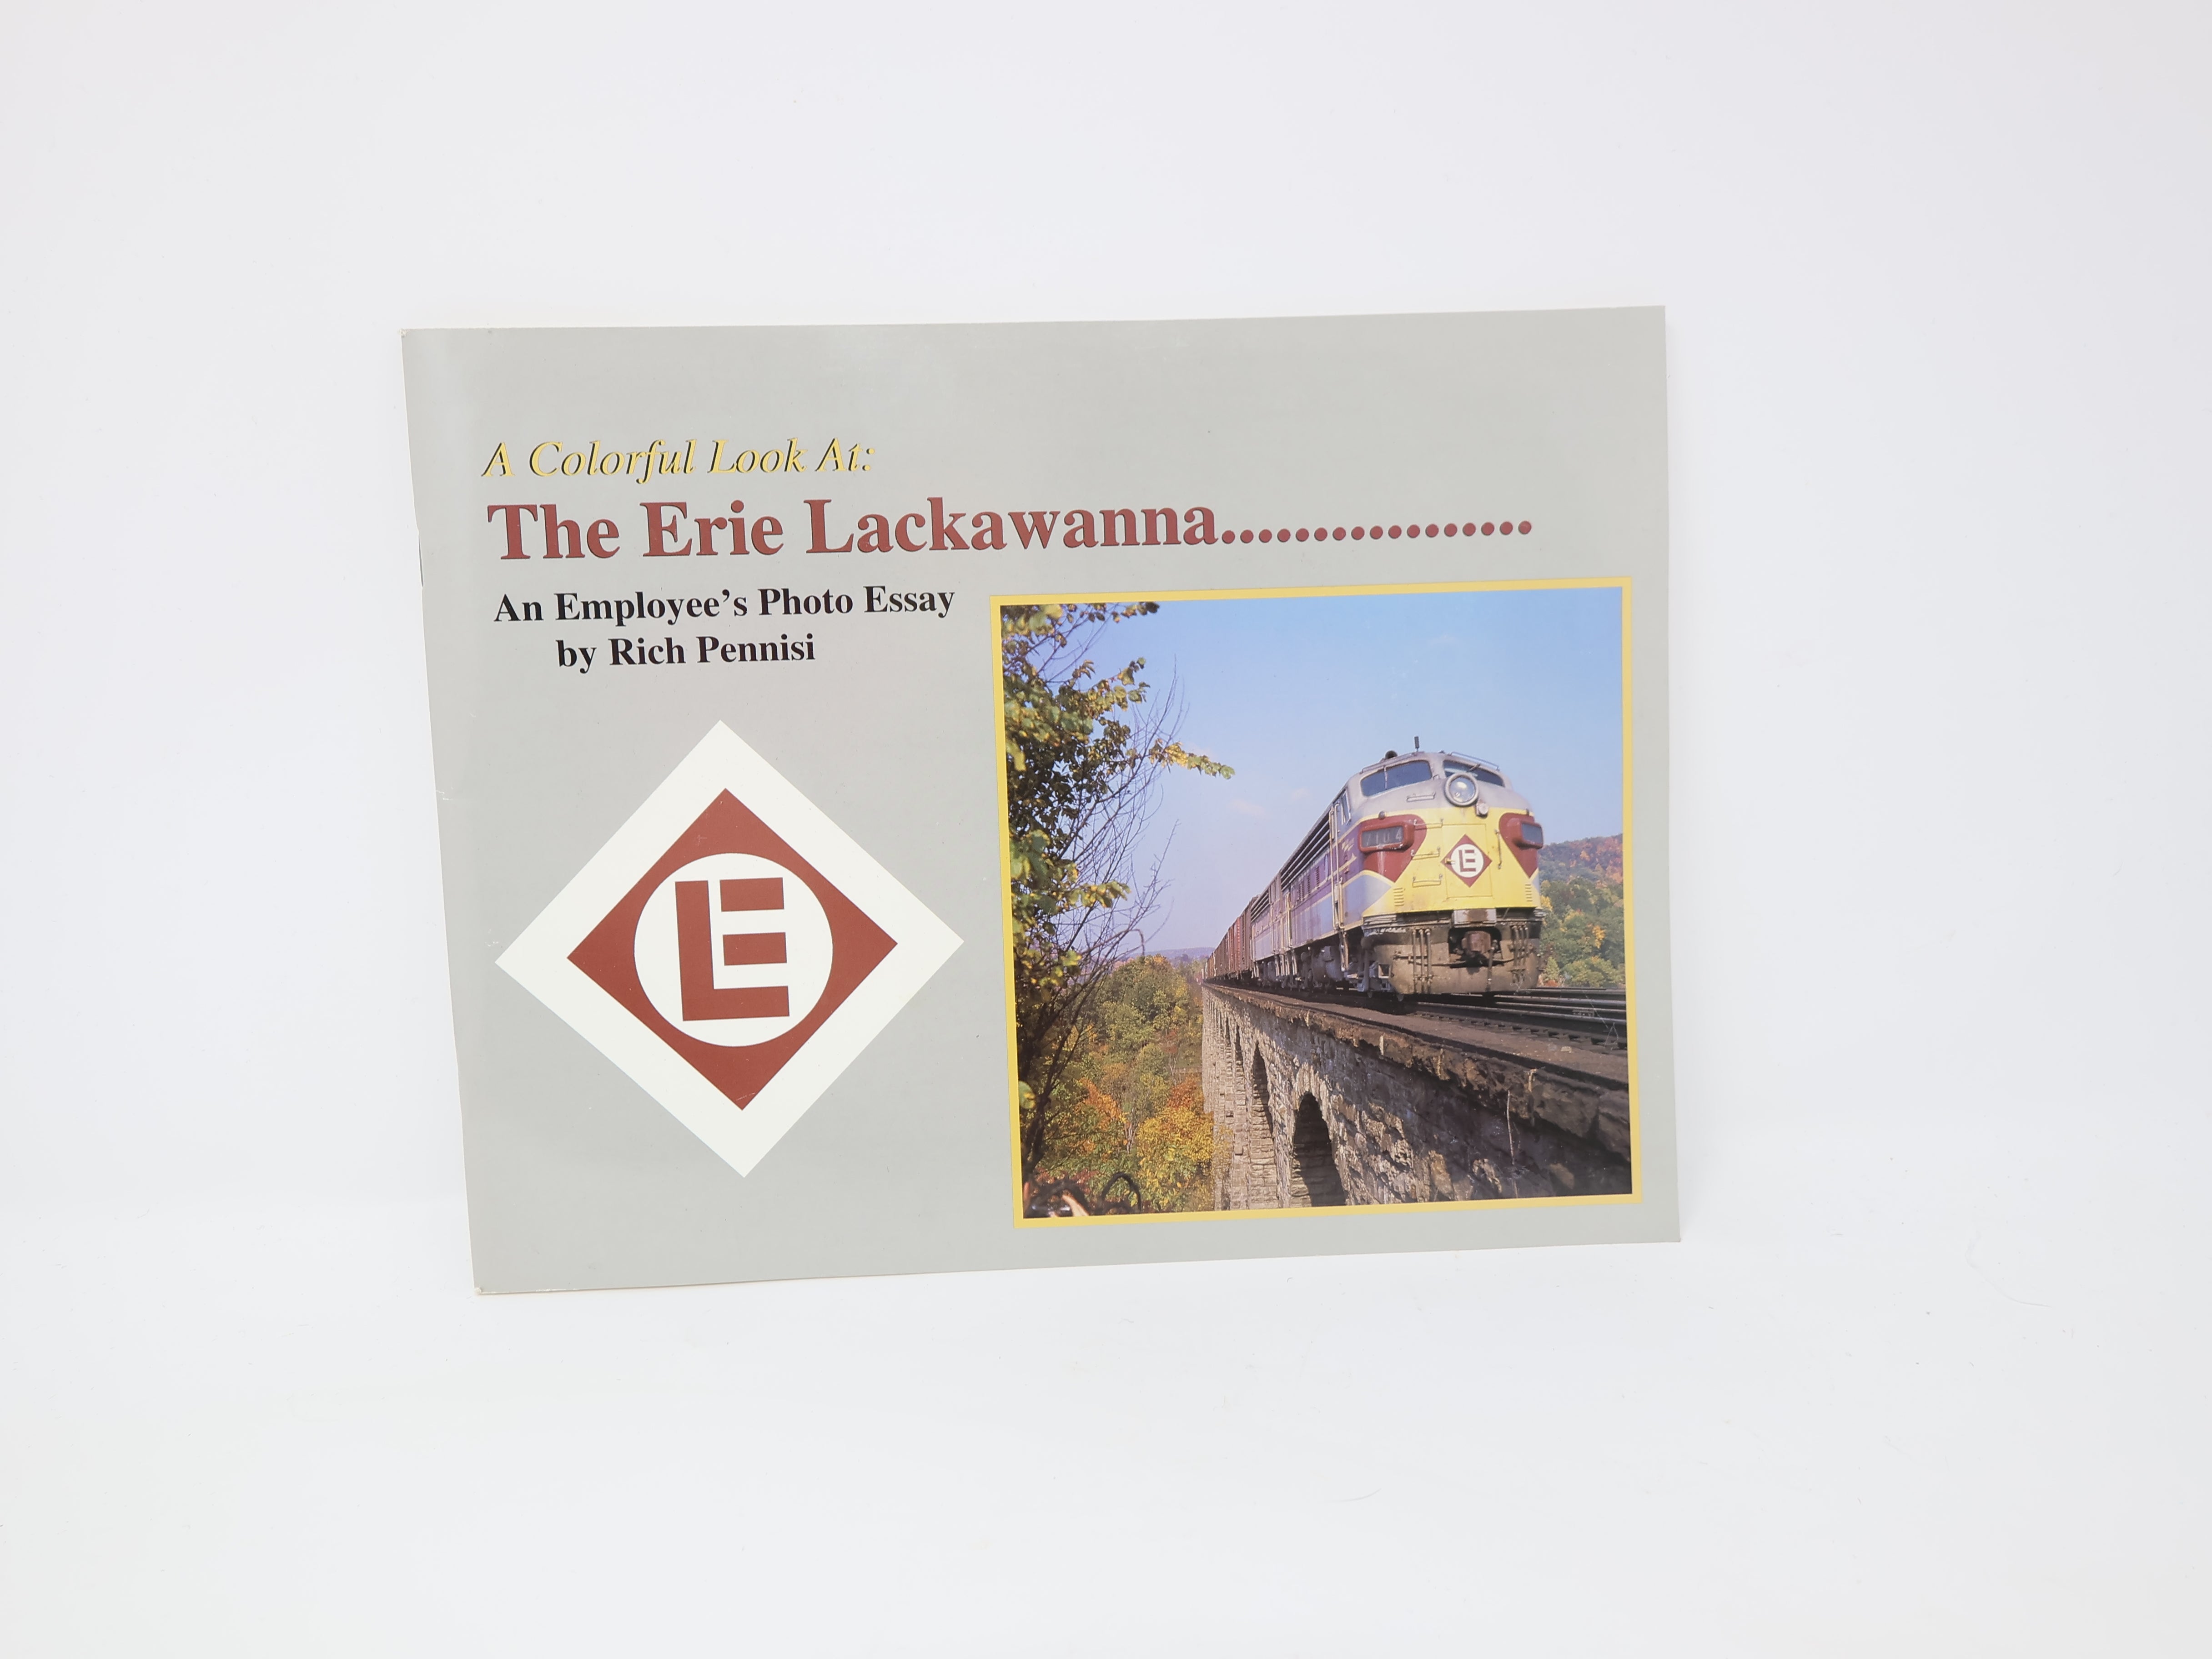 USED , A Colorful Look at The Erie Lackawanna An Employee's Photo Essay By Rich Pennisi Book